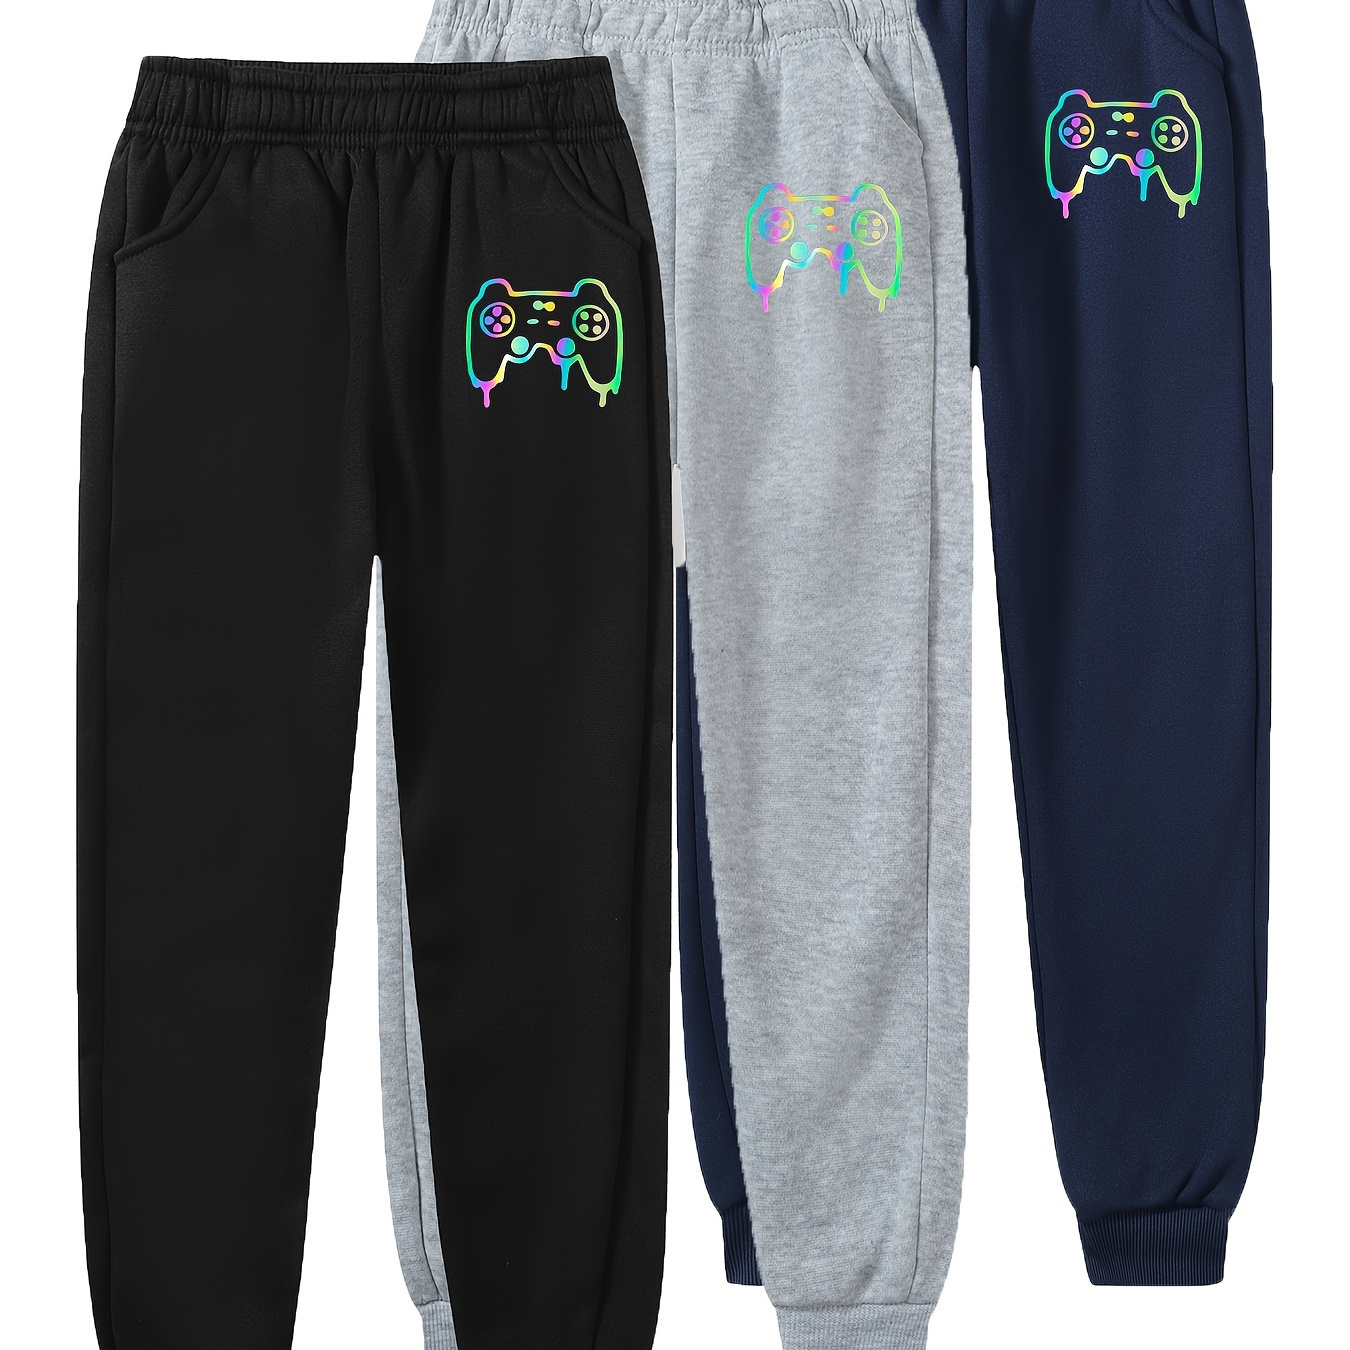 

3pcs Kid's Game Console Print Sweatpants, Warm Fleece Elastic Waist Jogger Pants, Boy's Clothes For Fall Winter, As Gift